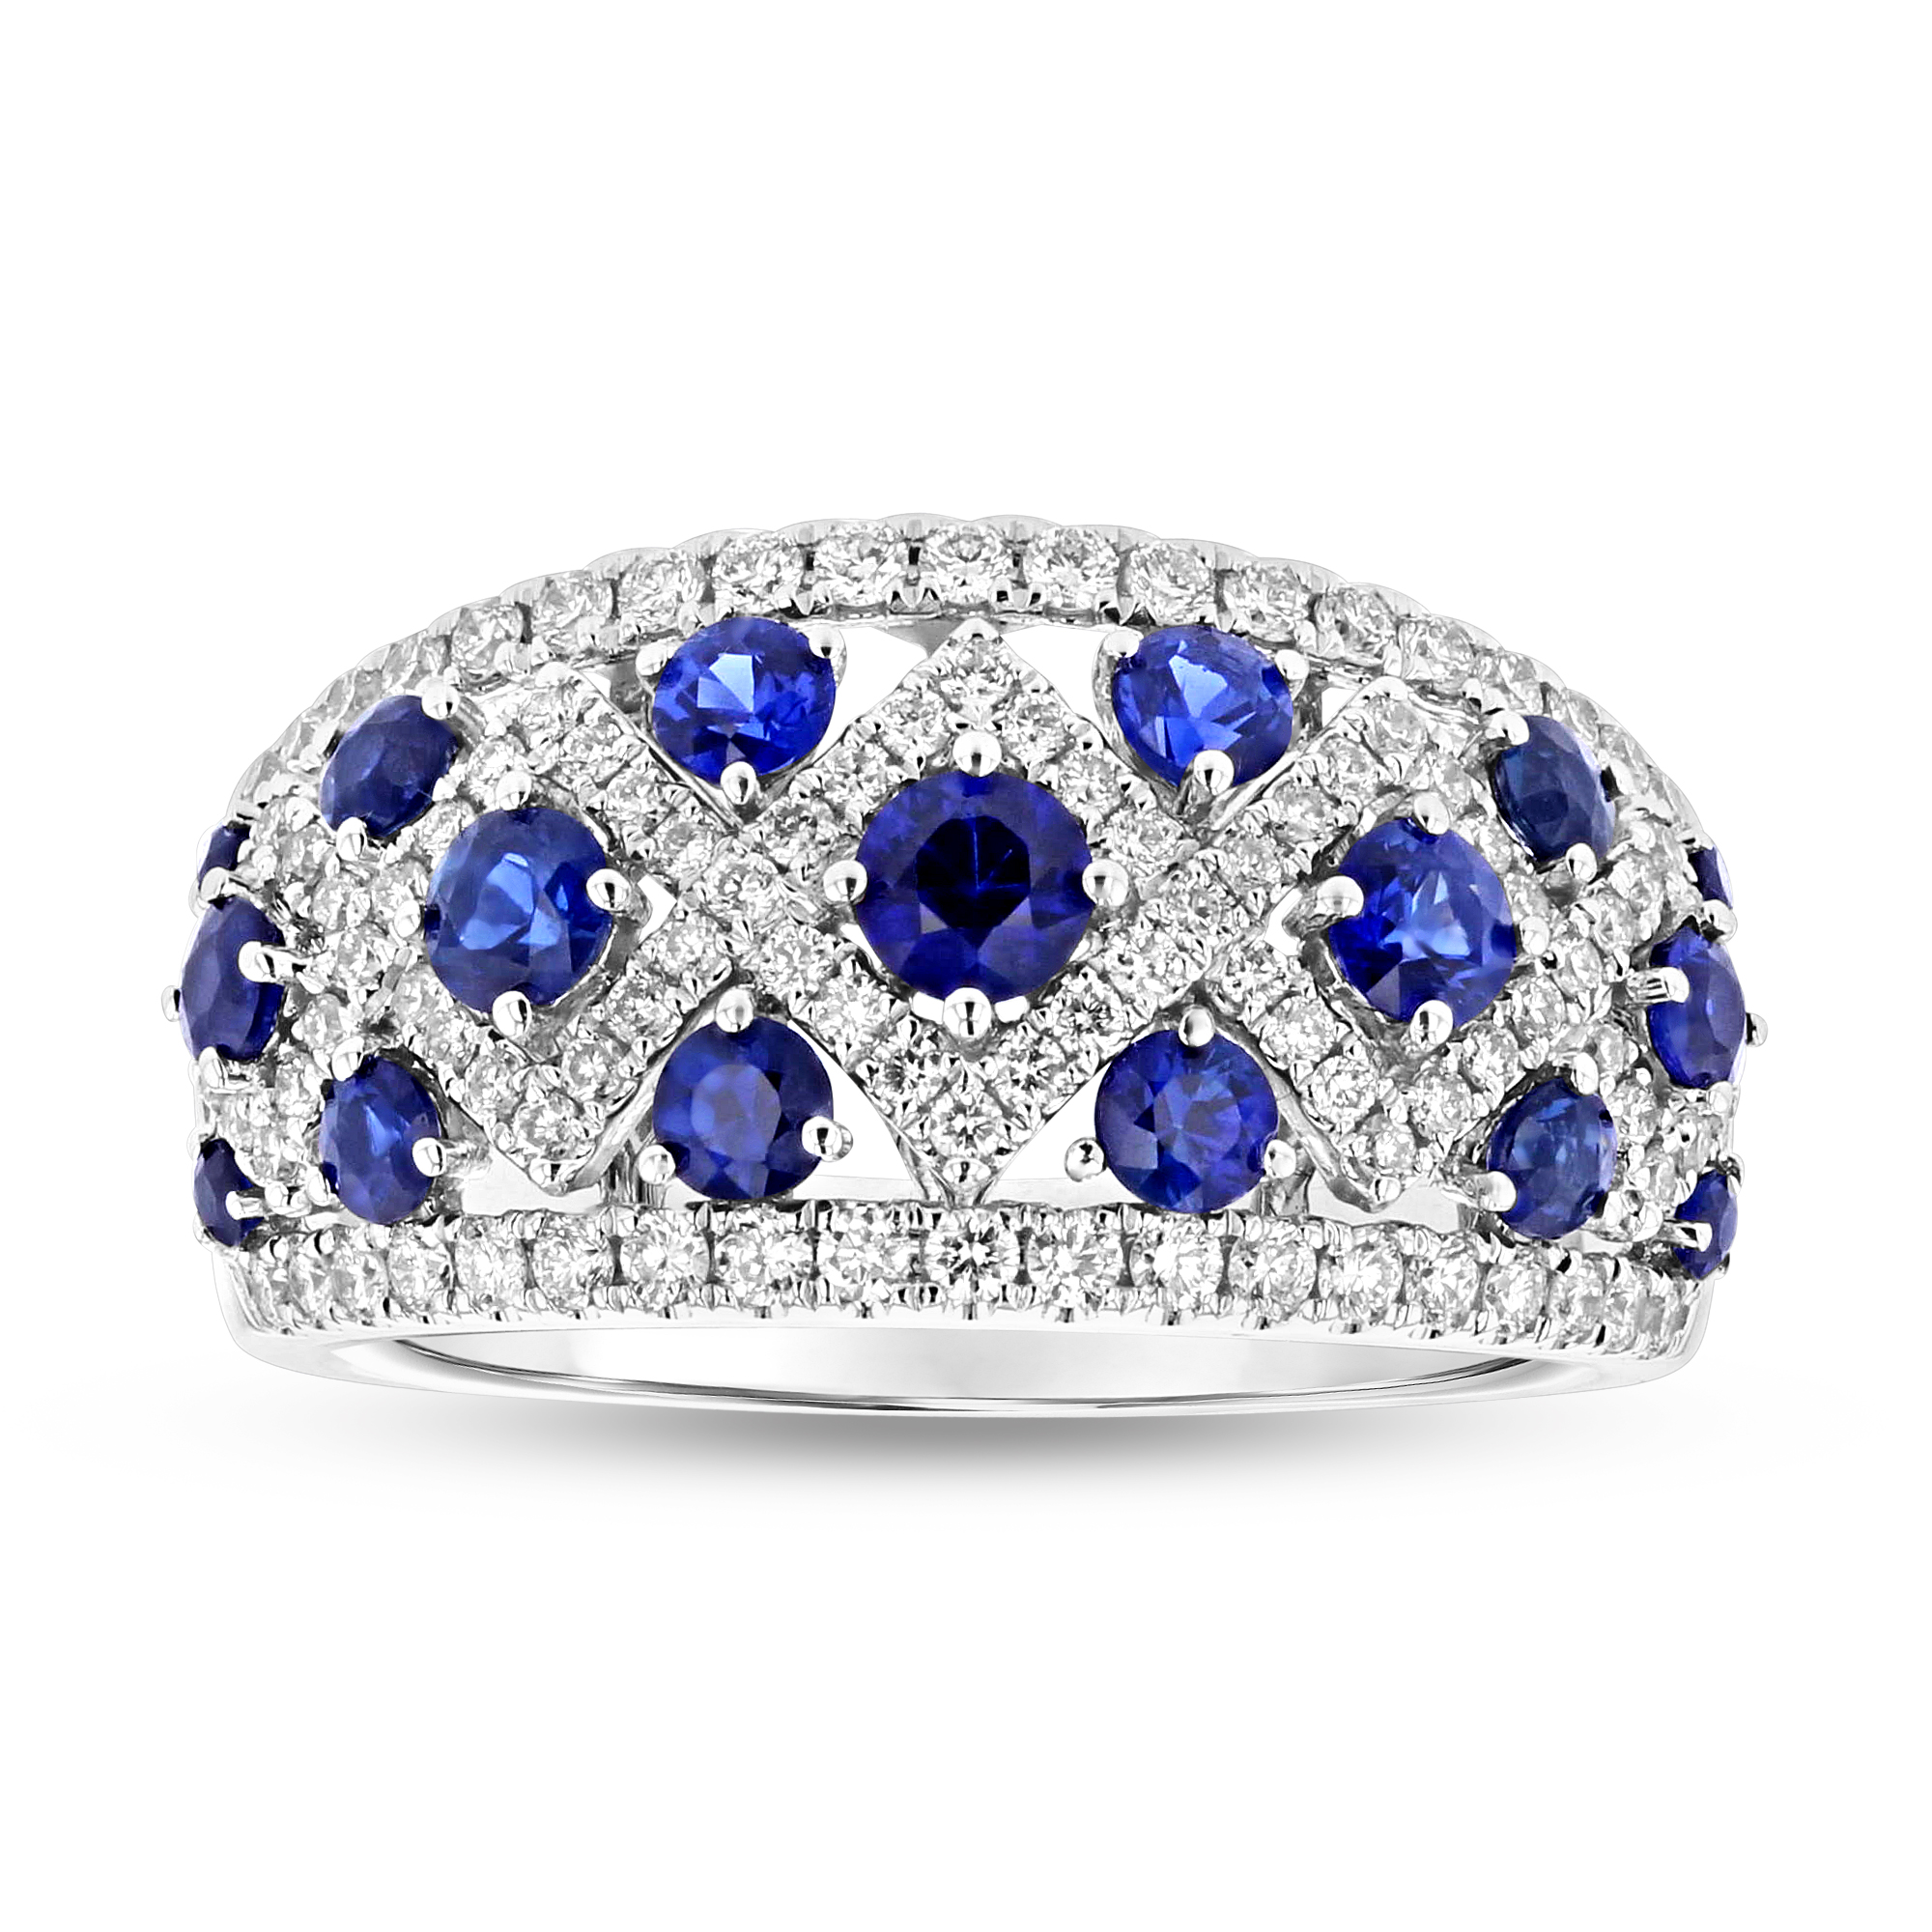 View 0.60ctw Diamond and Sapphire Band in 18k White Gold